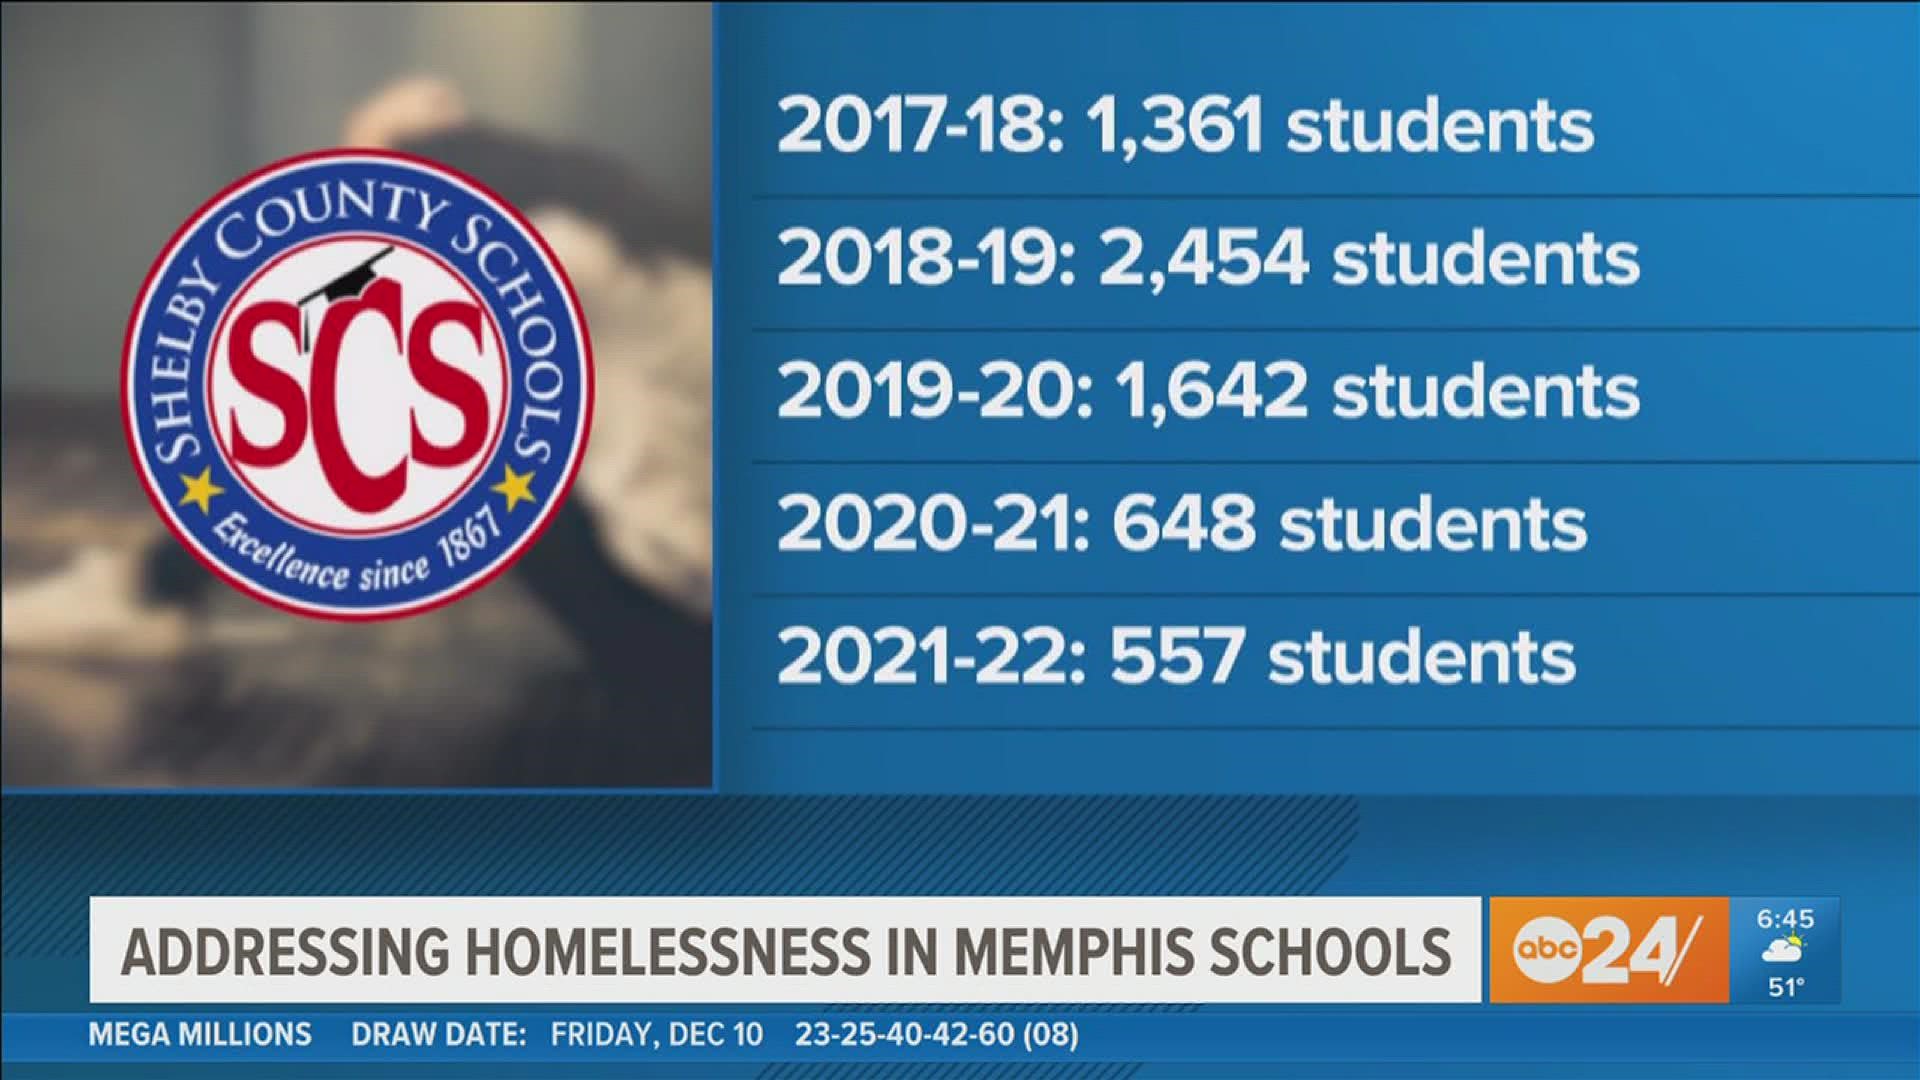 Students experiencing homelessness is an ongoing issue within Shelby County Schools, but schools are ramping up resources to help families in need.